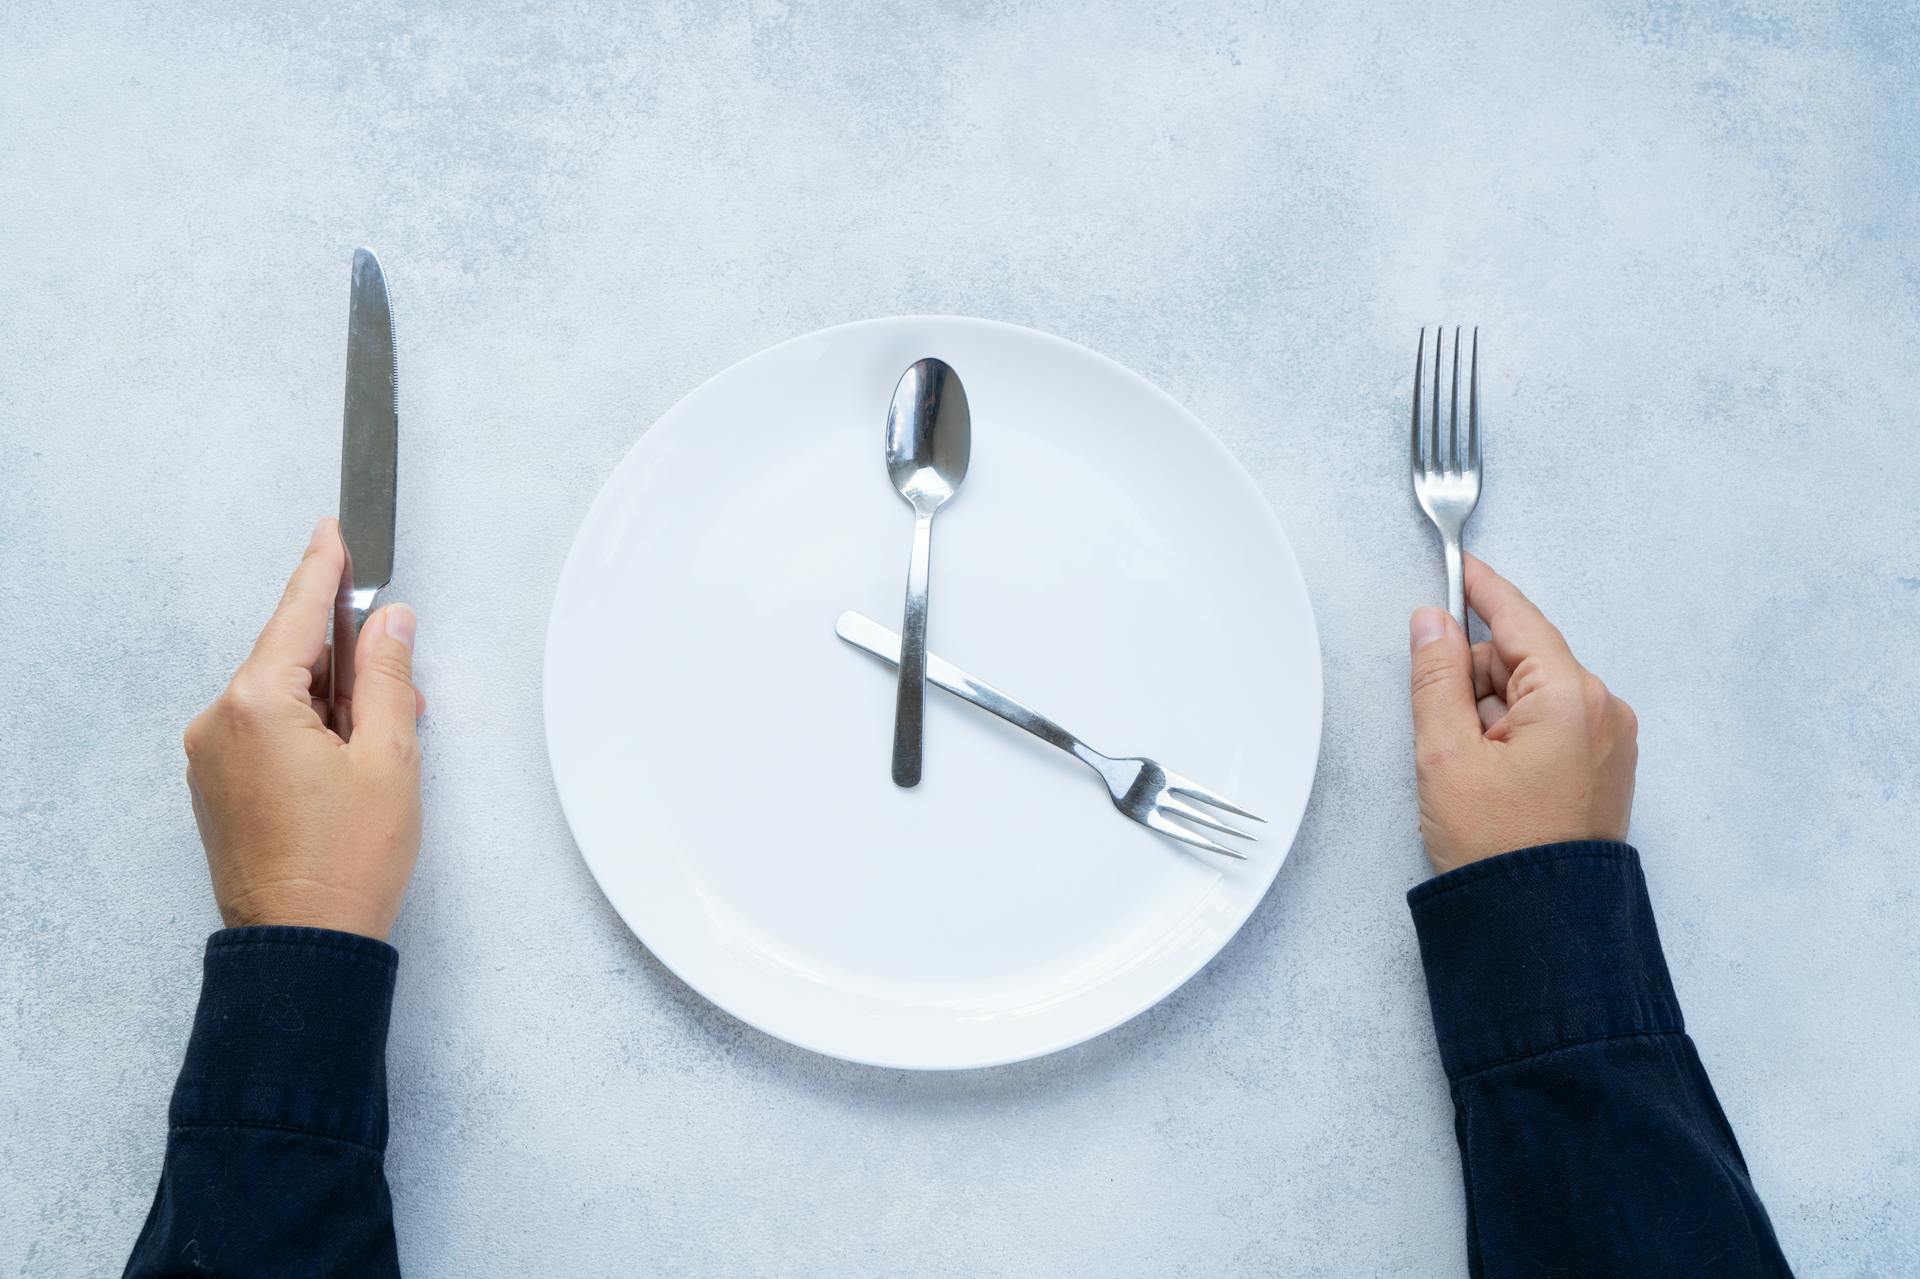 Is intermittent fasting the diet for you? Here’s what the science says